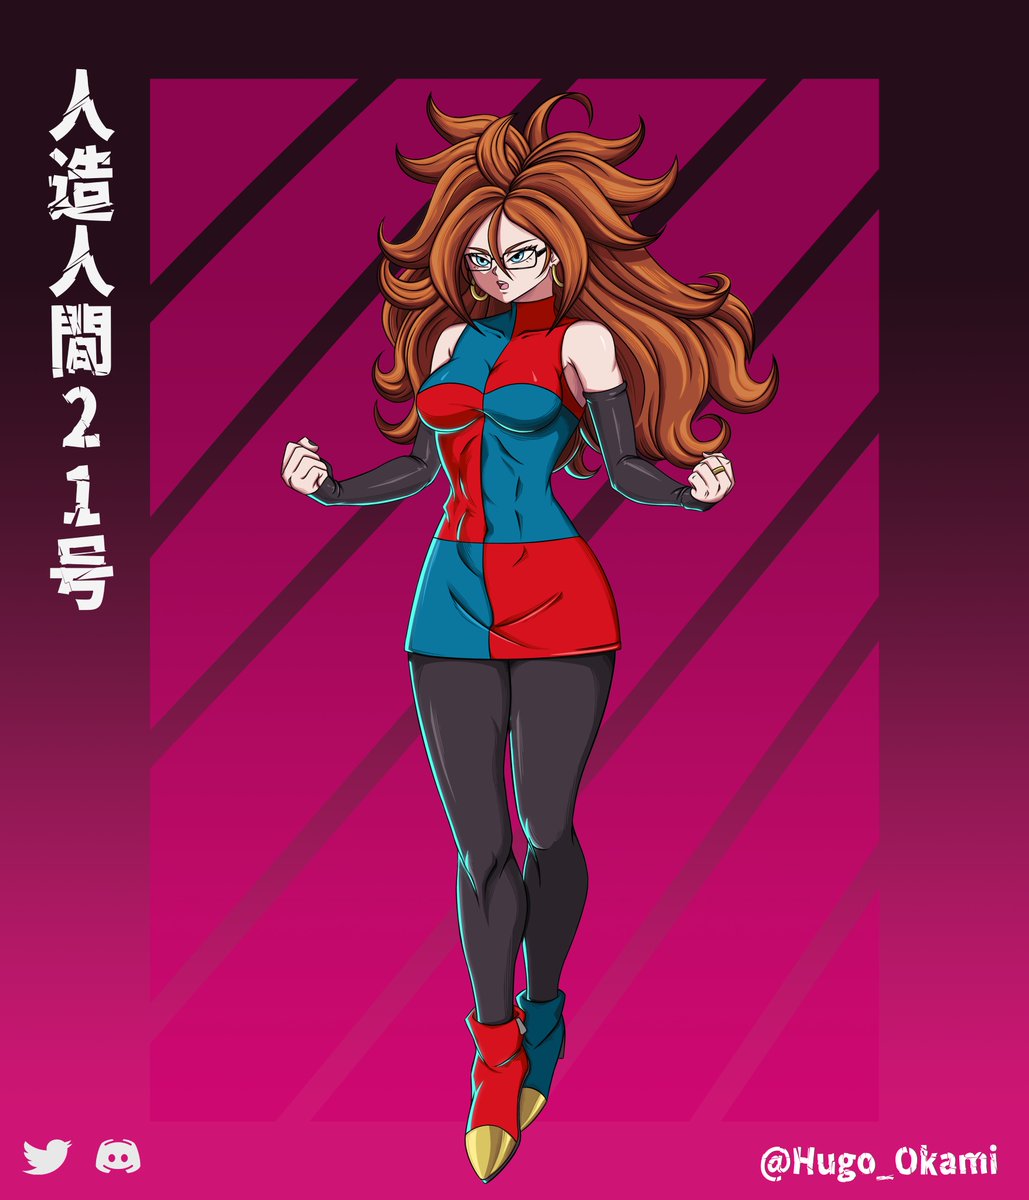 Without the lab coat.

#Android21 #人造人間21号